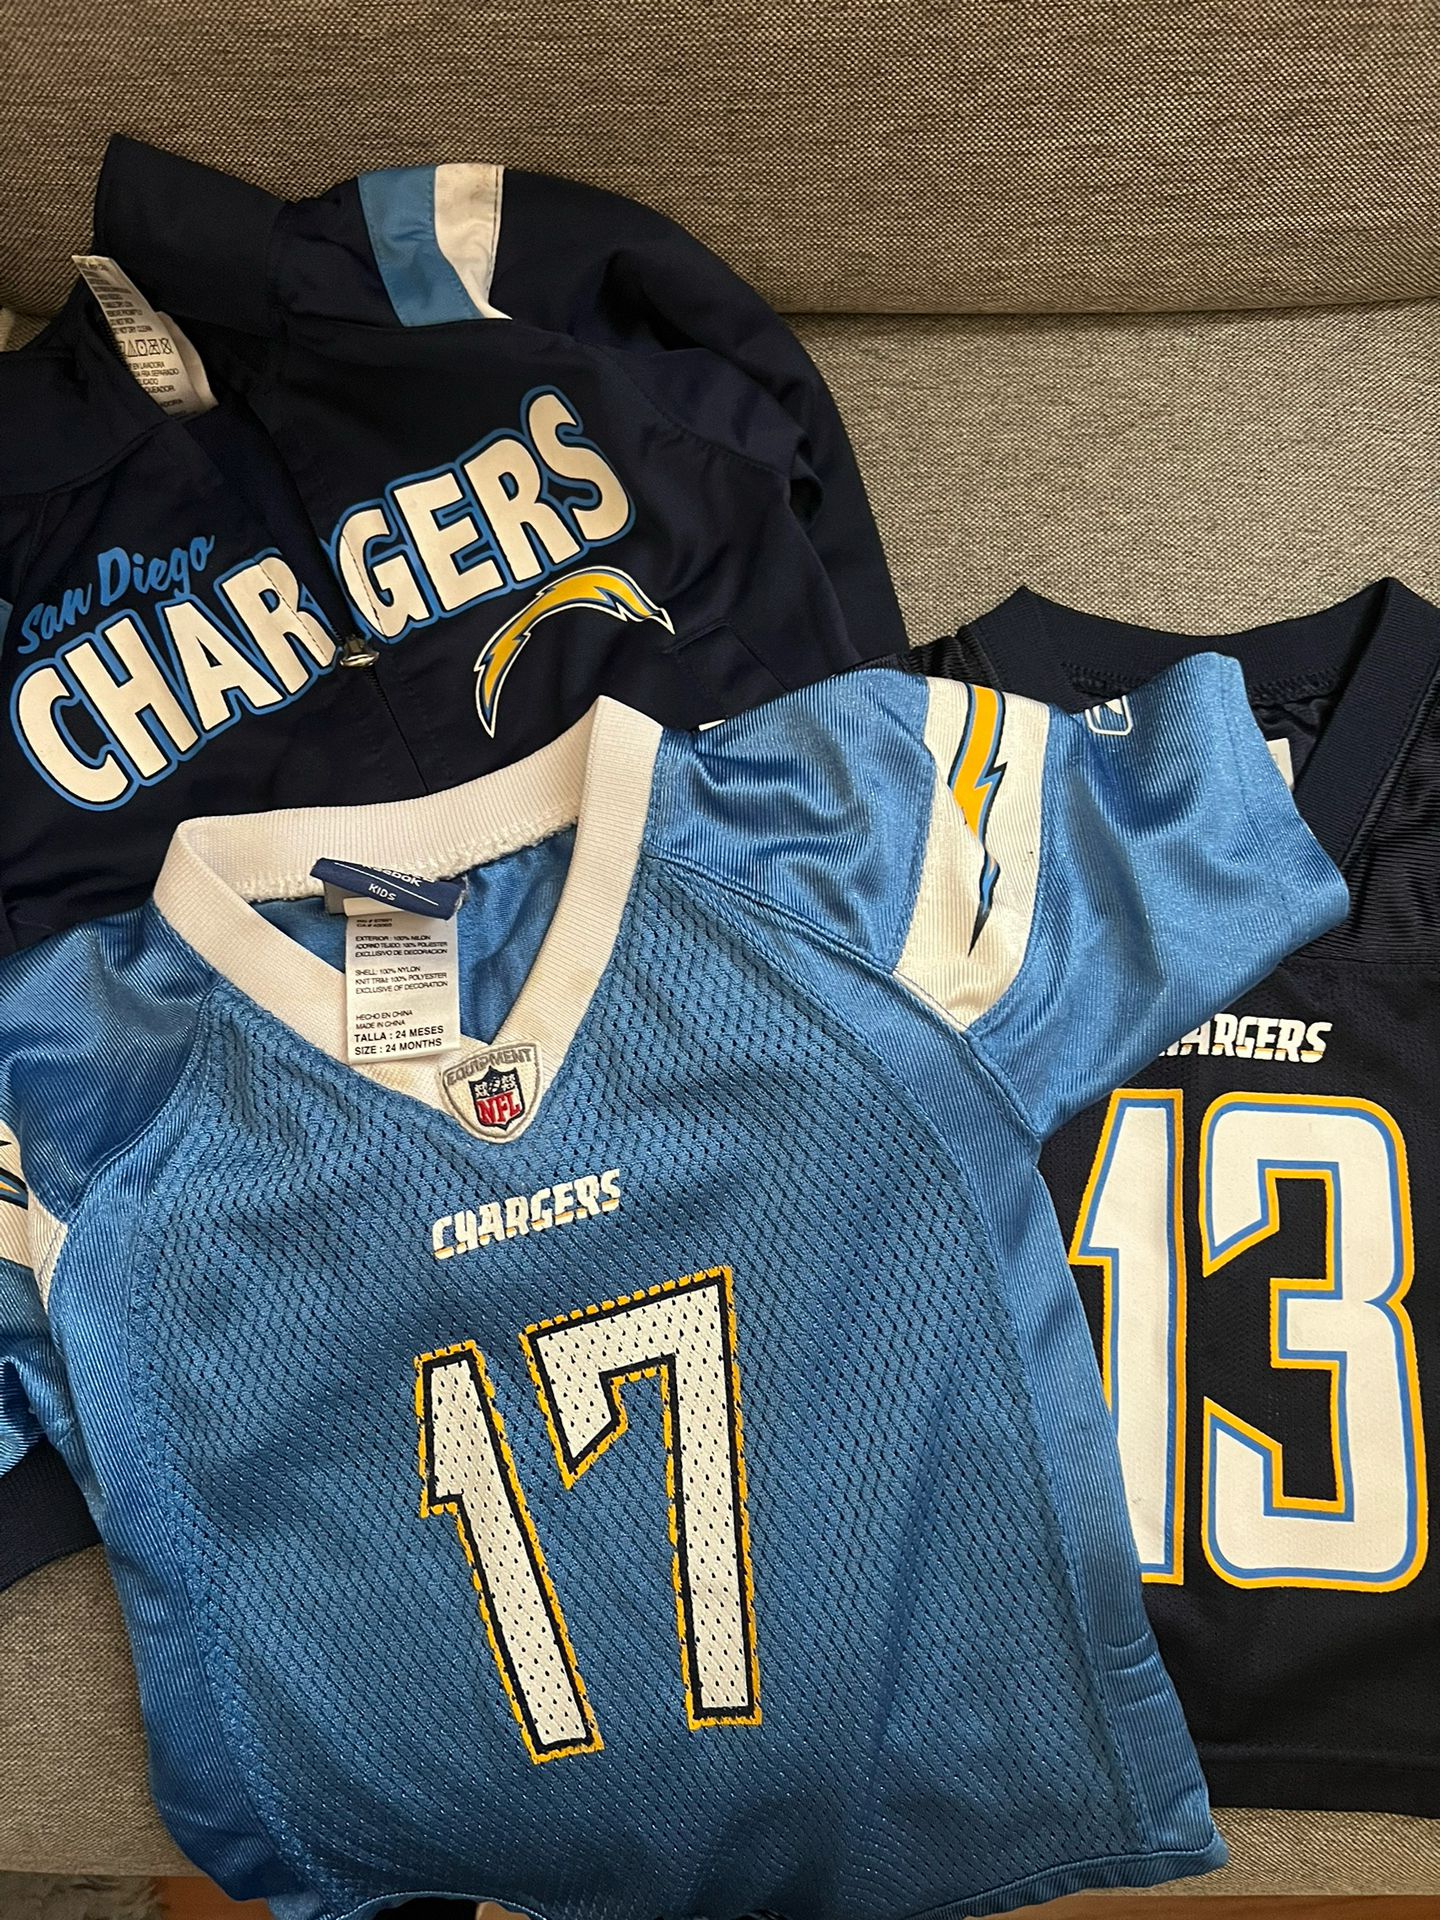 CHARGERS Toddler Gear